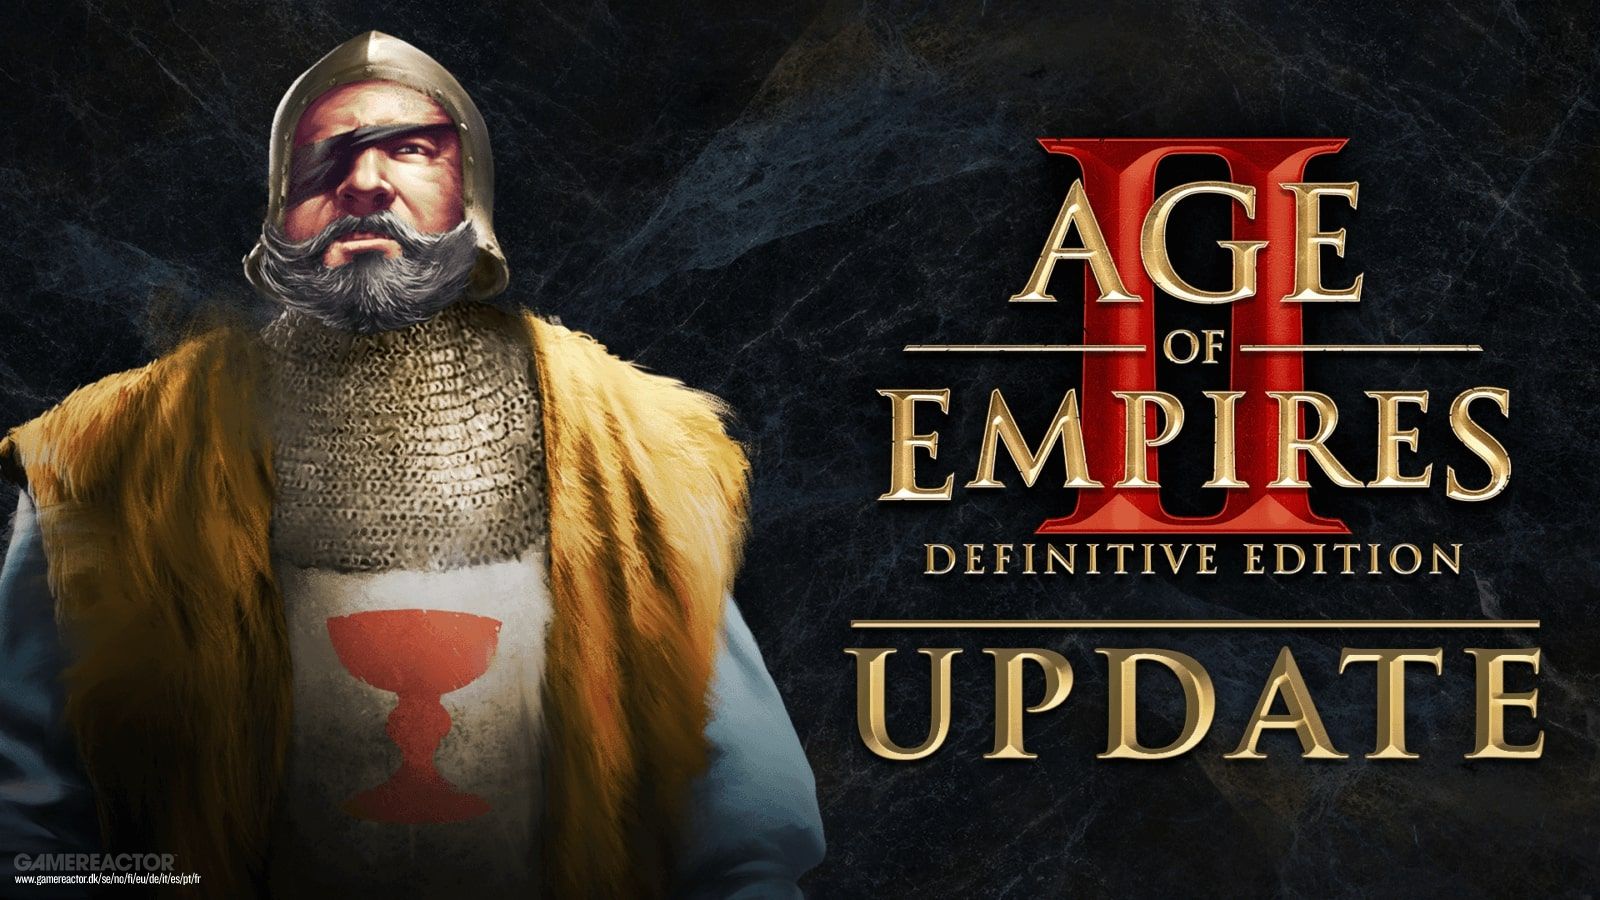 Spring is also coming in Age of Empires II: Definitive Edition